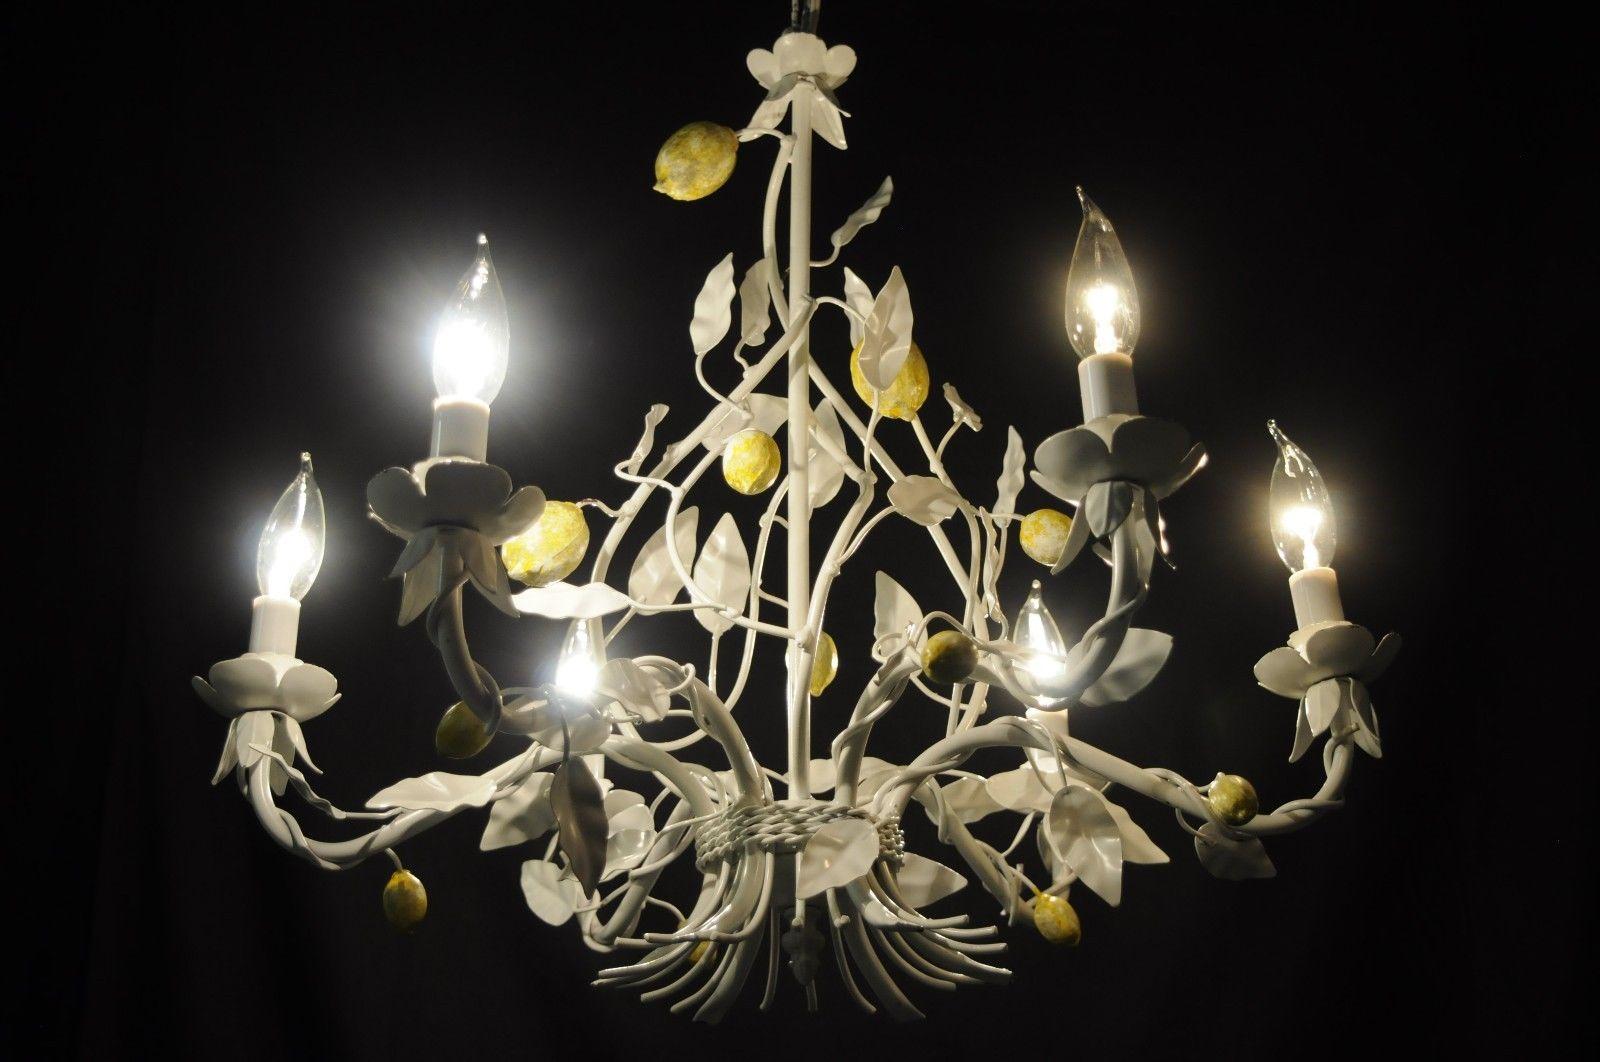 Vintage white and yellow lemon chandelier, Italian Hollywood Regency. Item features scrolling white painted metal frame, yellow lemon accents, leafy bobeche, six scrolling arms, and six lights, circa mid-20th century, Italy. Measurements: 21